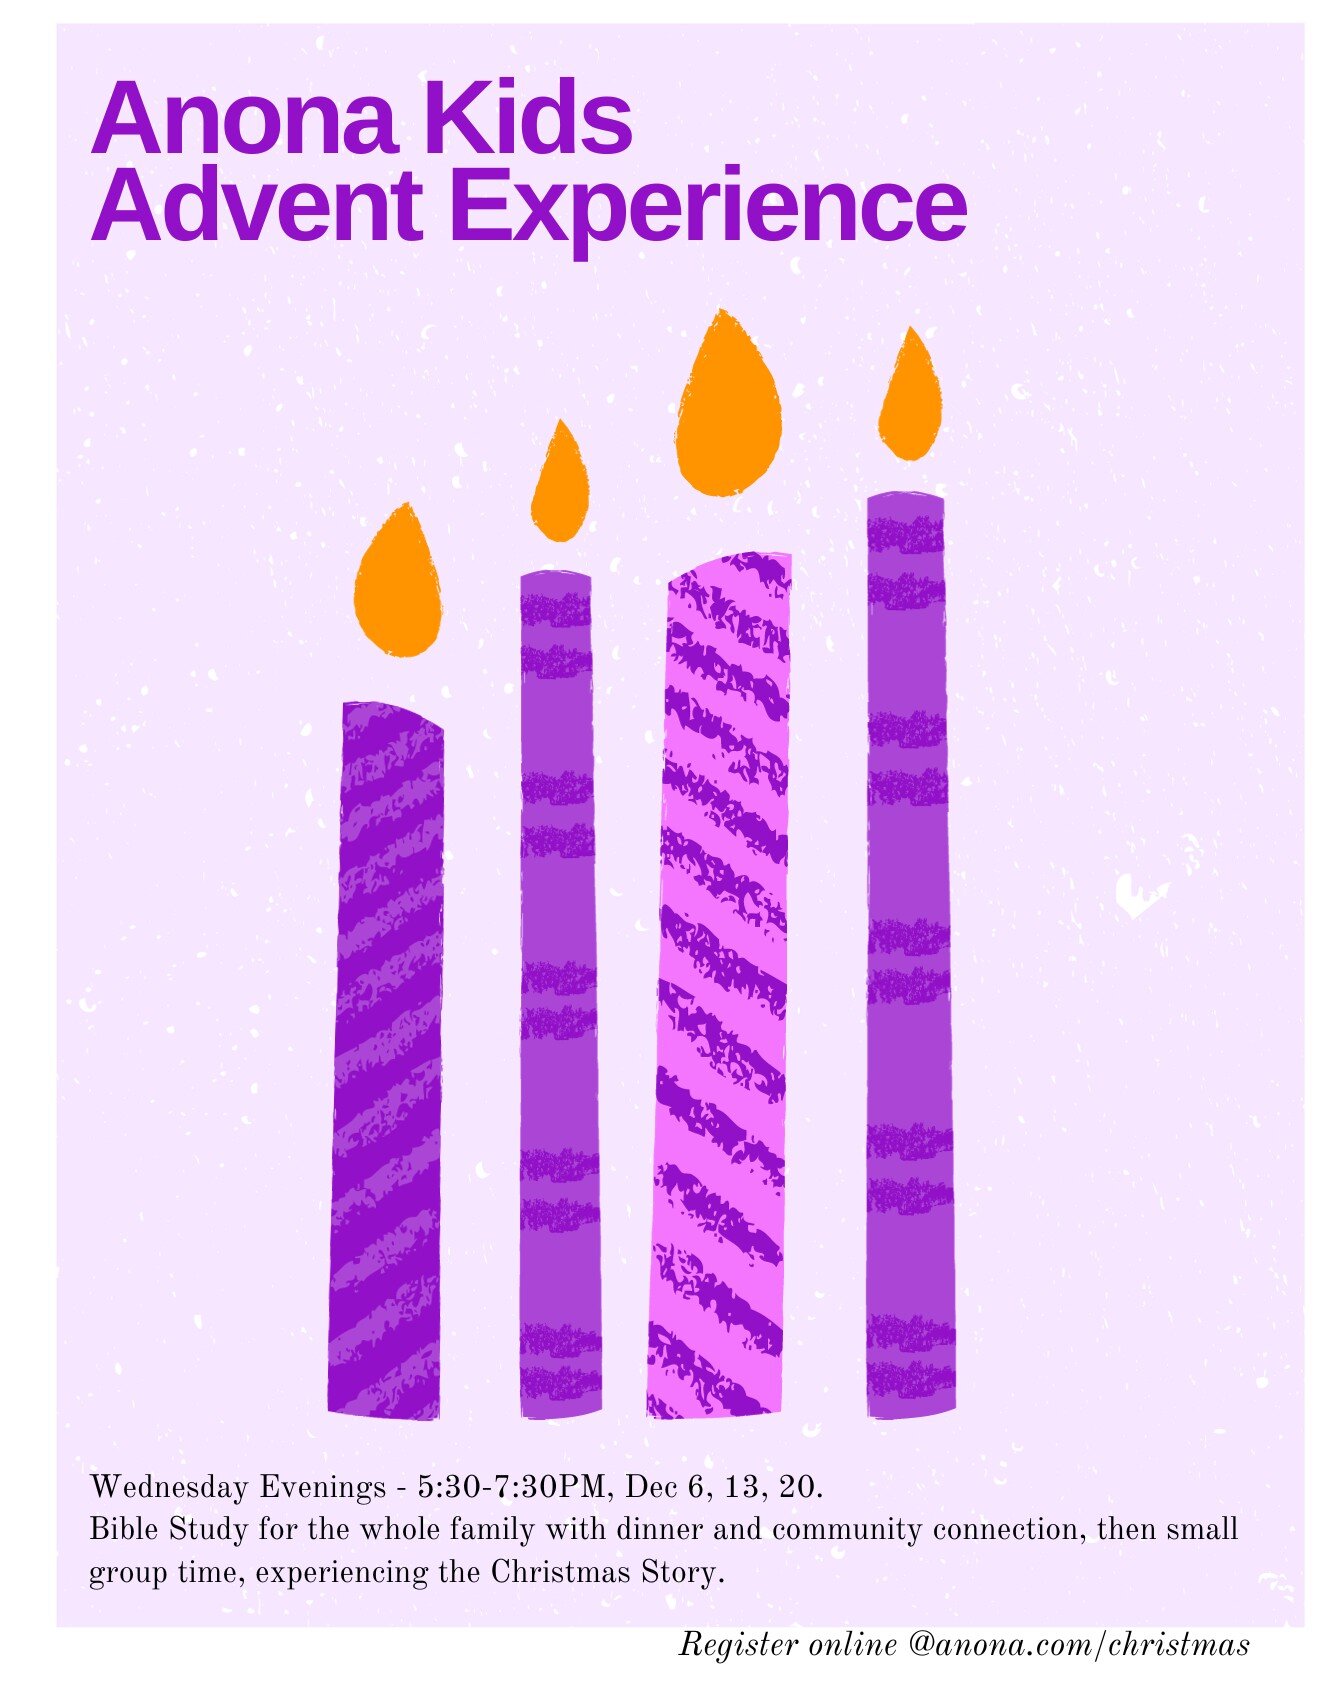 If you haven't already registered for our All Ages Advent Study, we would love for you to join us for the next couple of Wednesday evenings as we journey through the Christmas story together! This is such a fun evening, where we eat dinner together, 